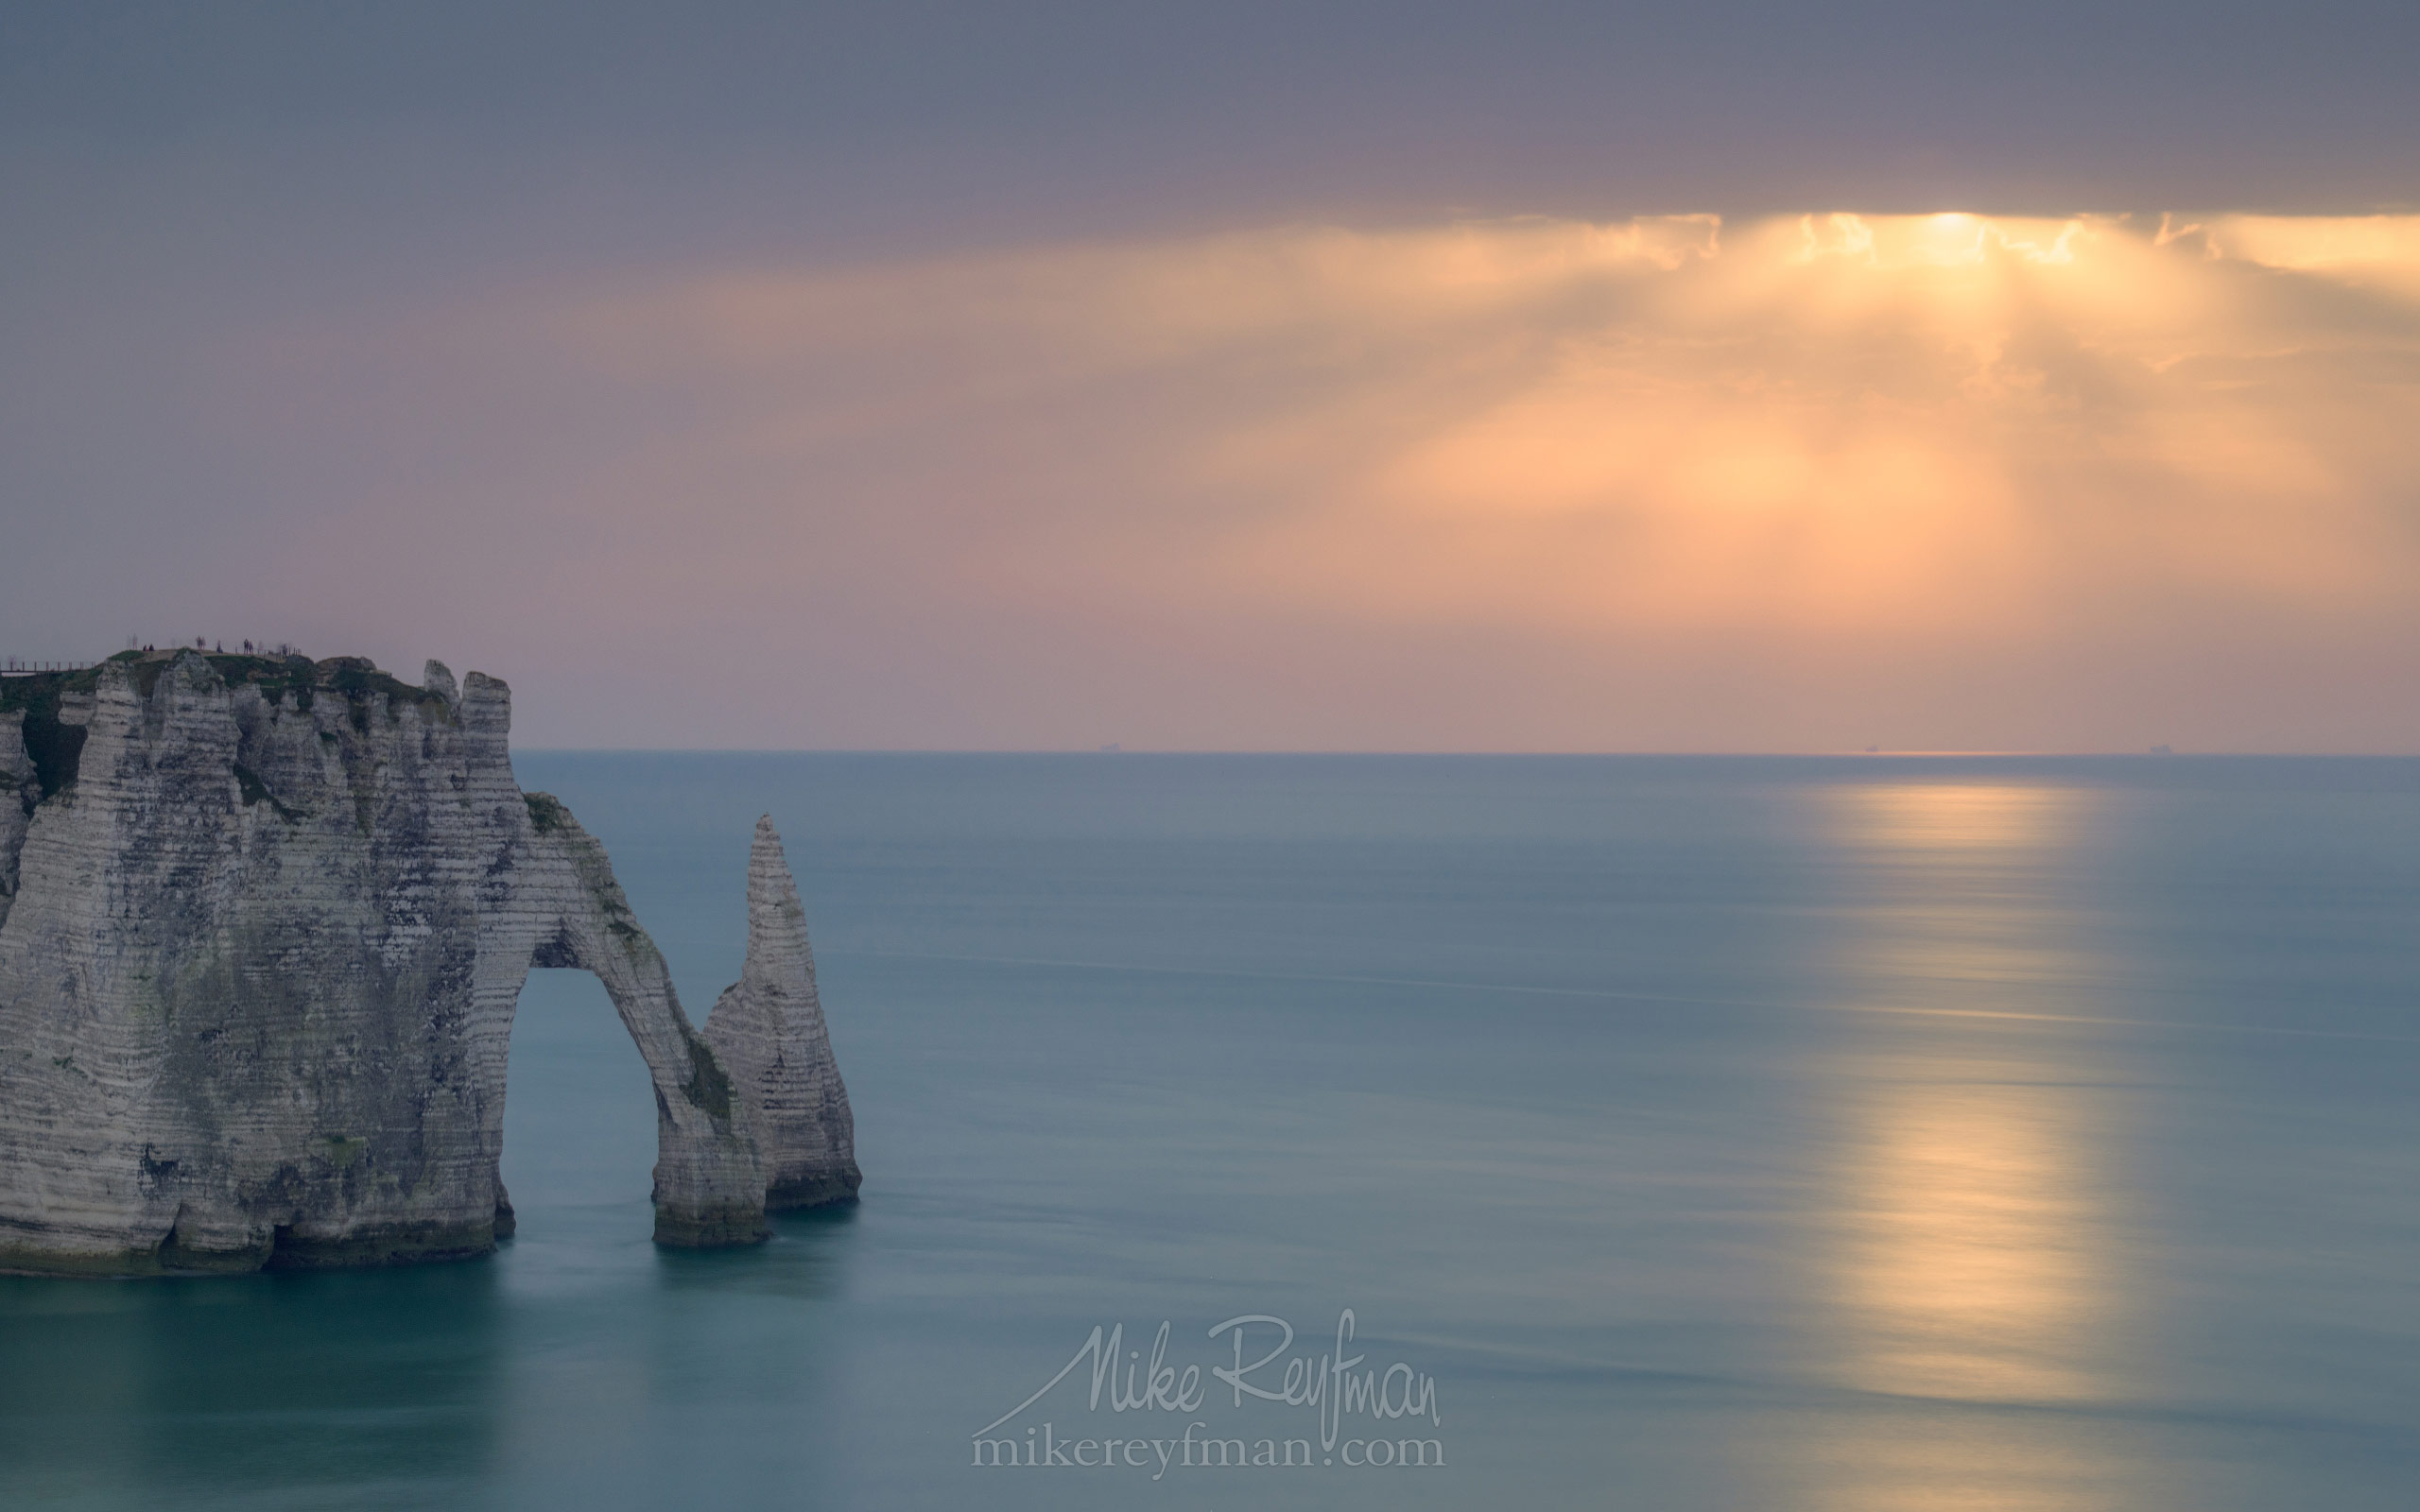 Arch Porte d'Aval and L'Aiguille - the Needle at sunset. Cote d'Albatre – The Alabaster Coast. Ertretat, Normandy, France ET1-MR50A0354 - White Chalk Cliffs and Arches of Alabaster Coast. Etretat, Upper Normandy, France - Mike Reyfman Photography